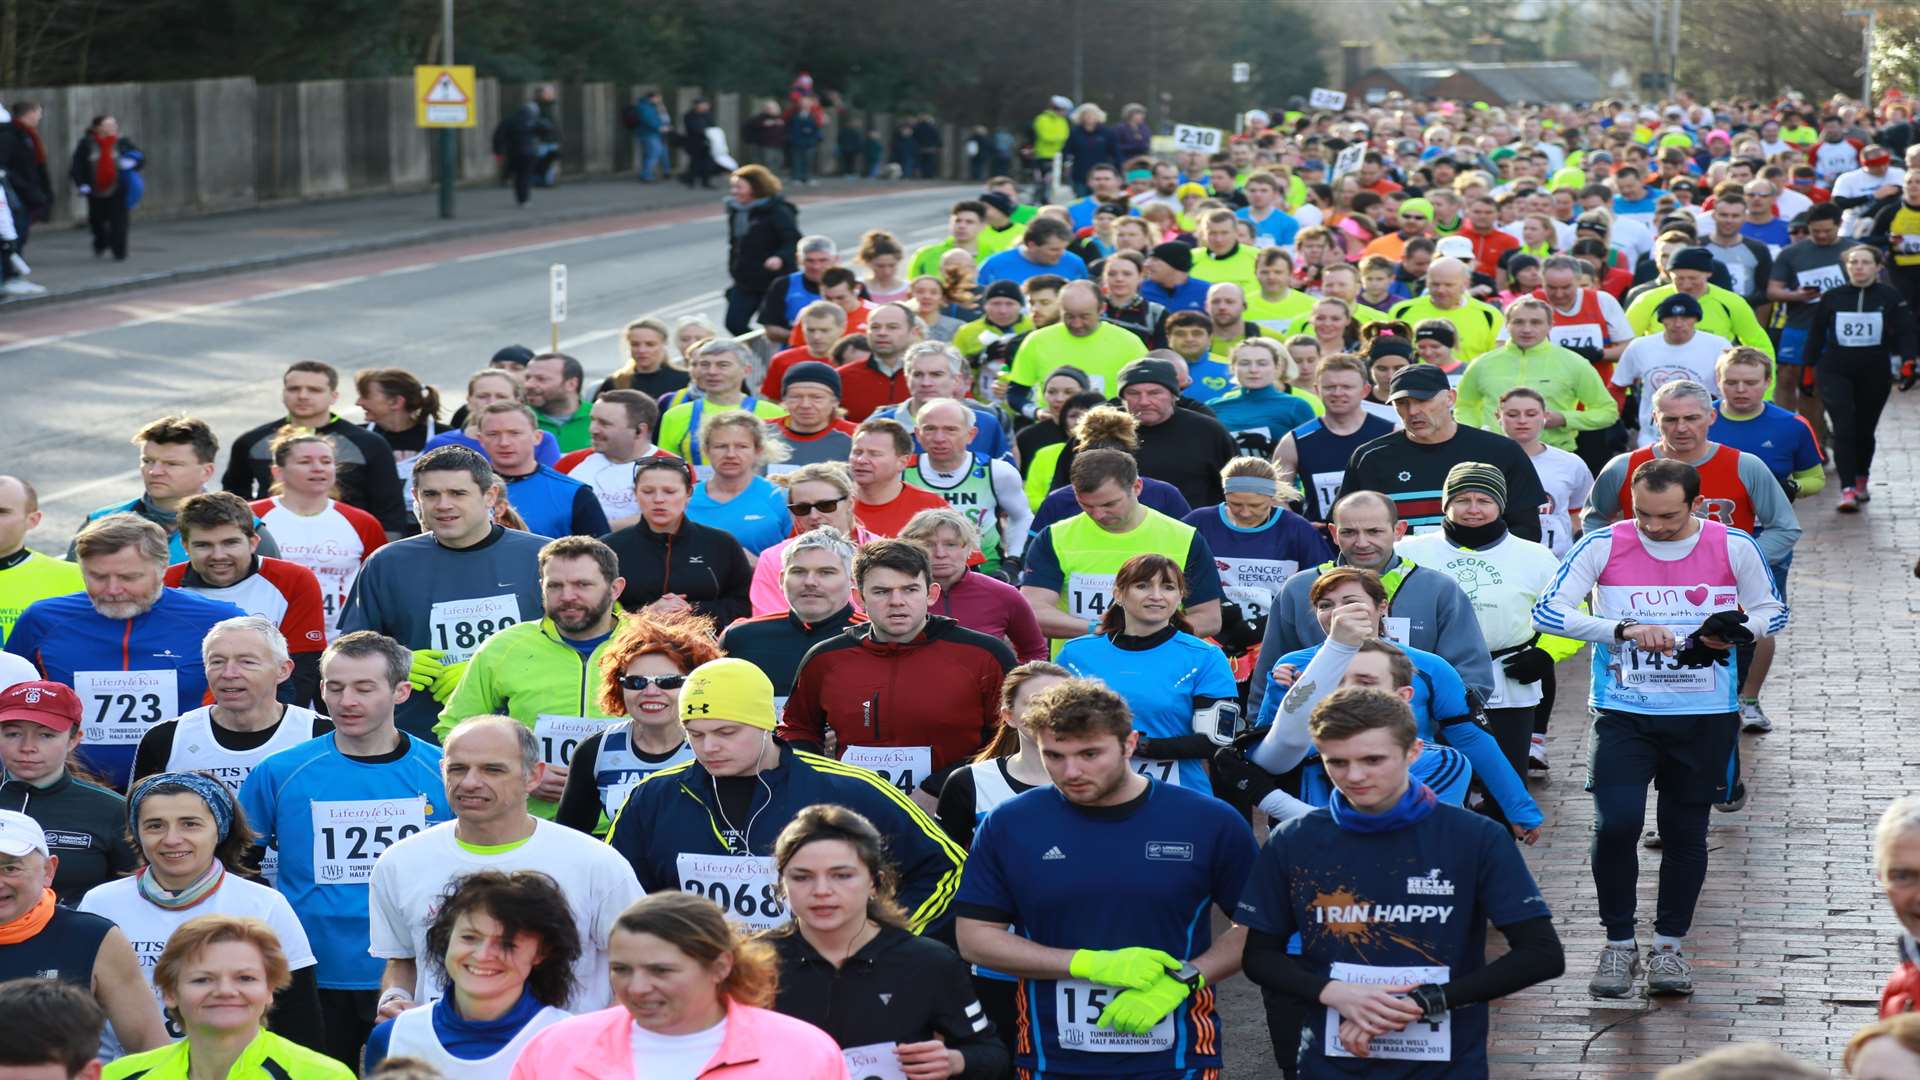 More than 1,000 runners are expected to take part in the half marathon